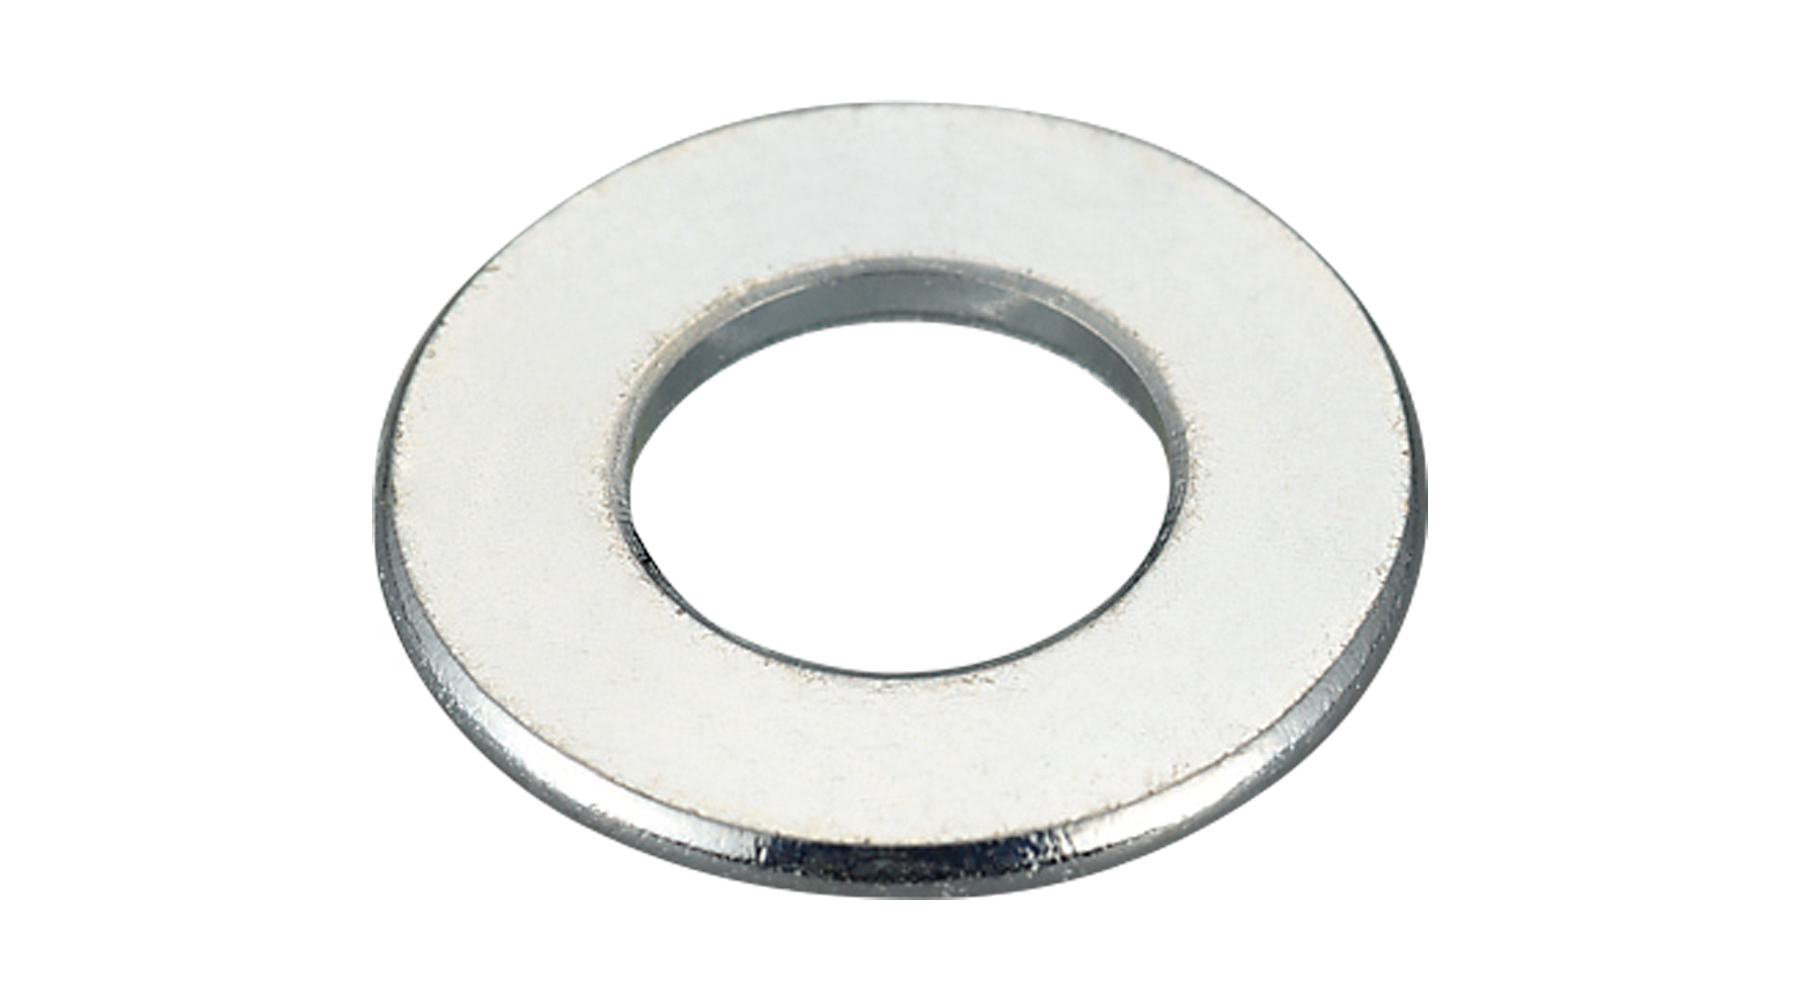 FLAT WASHER(TRIVALENT)